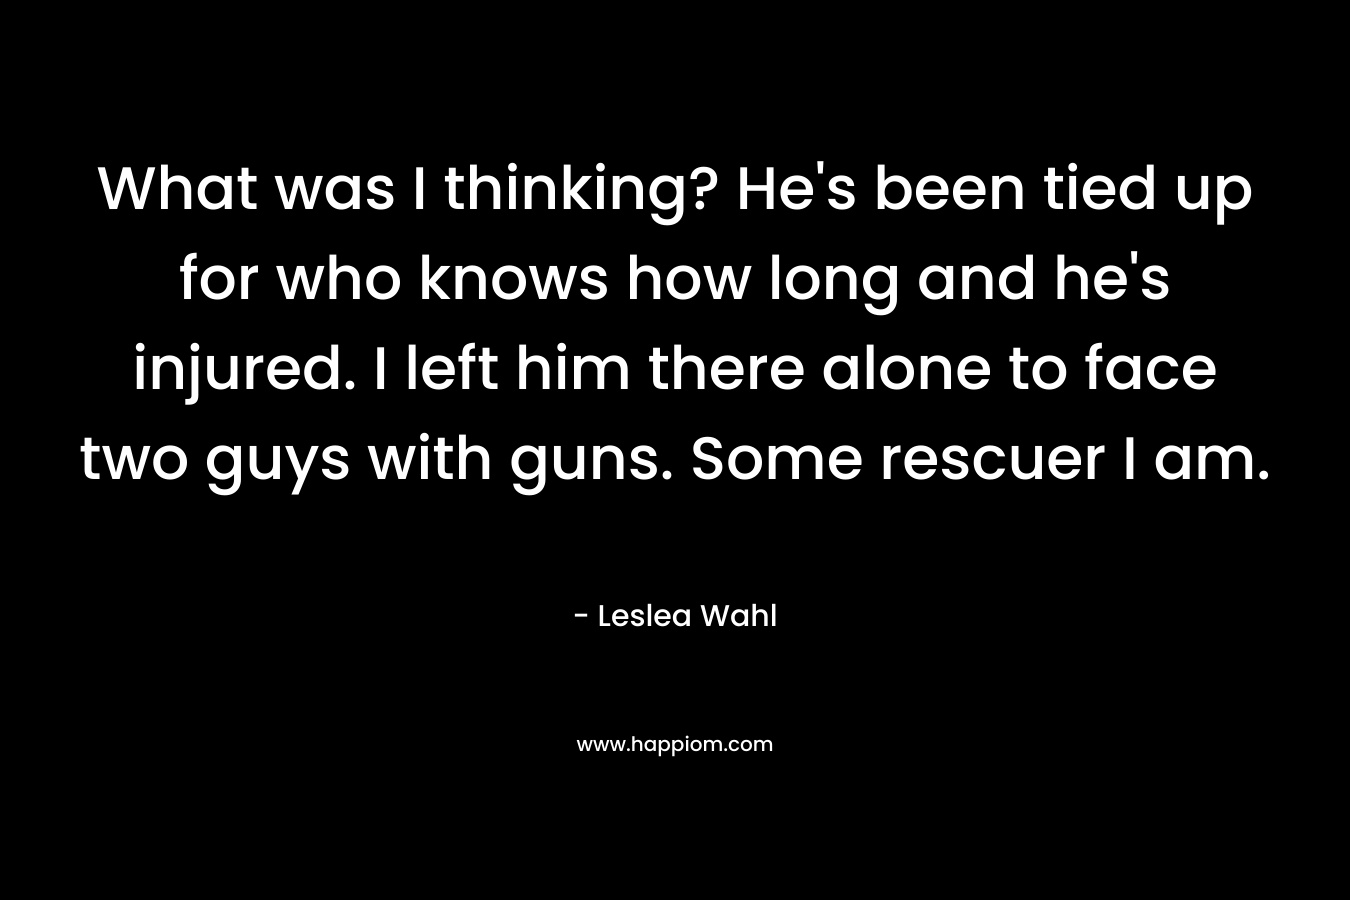 What was I thinking? He’s been tied up for who knows how long and he’s injured. I left him there alone to face two guys with guns. Some rescuer I am. – Leslea Wahl